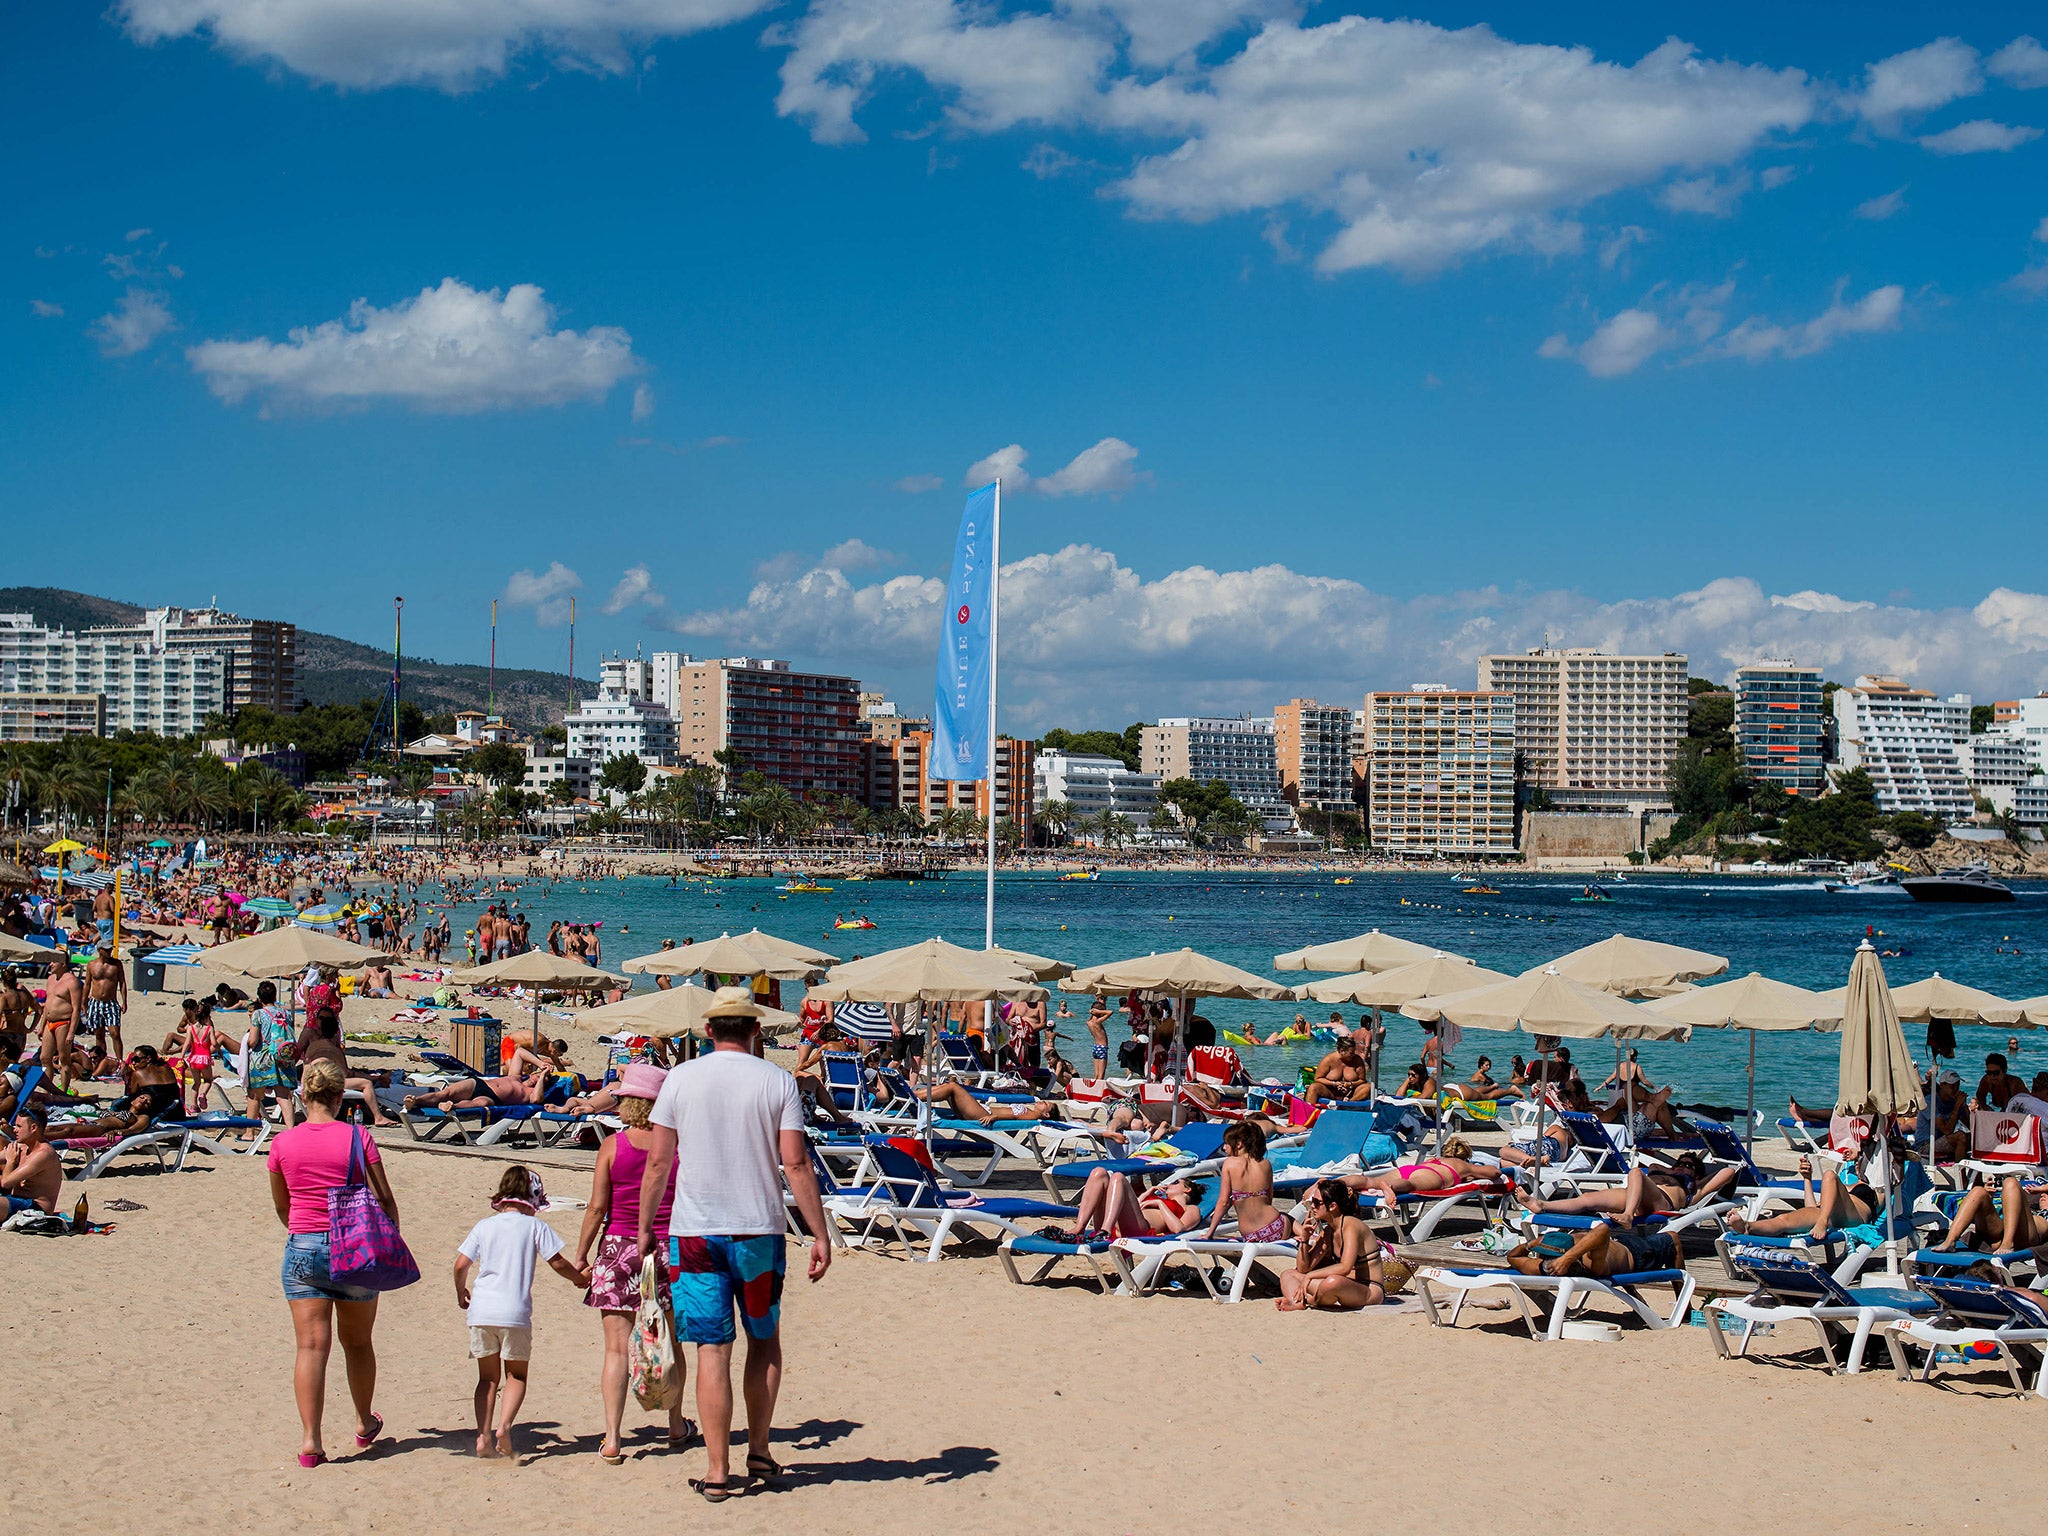 Over 380,000 British expats would be at risk in Spain